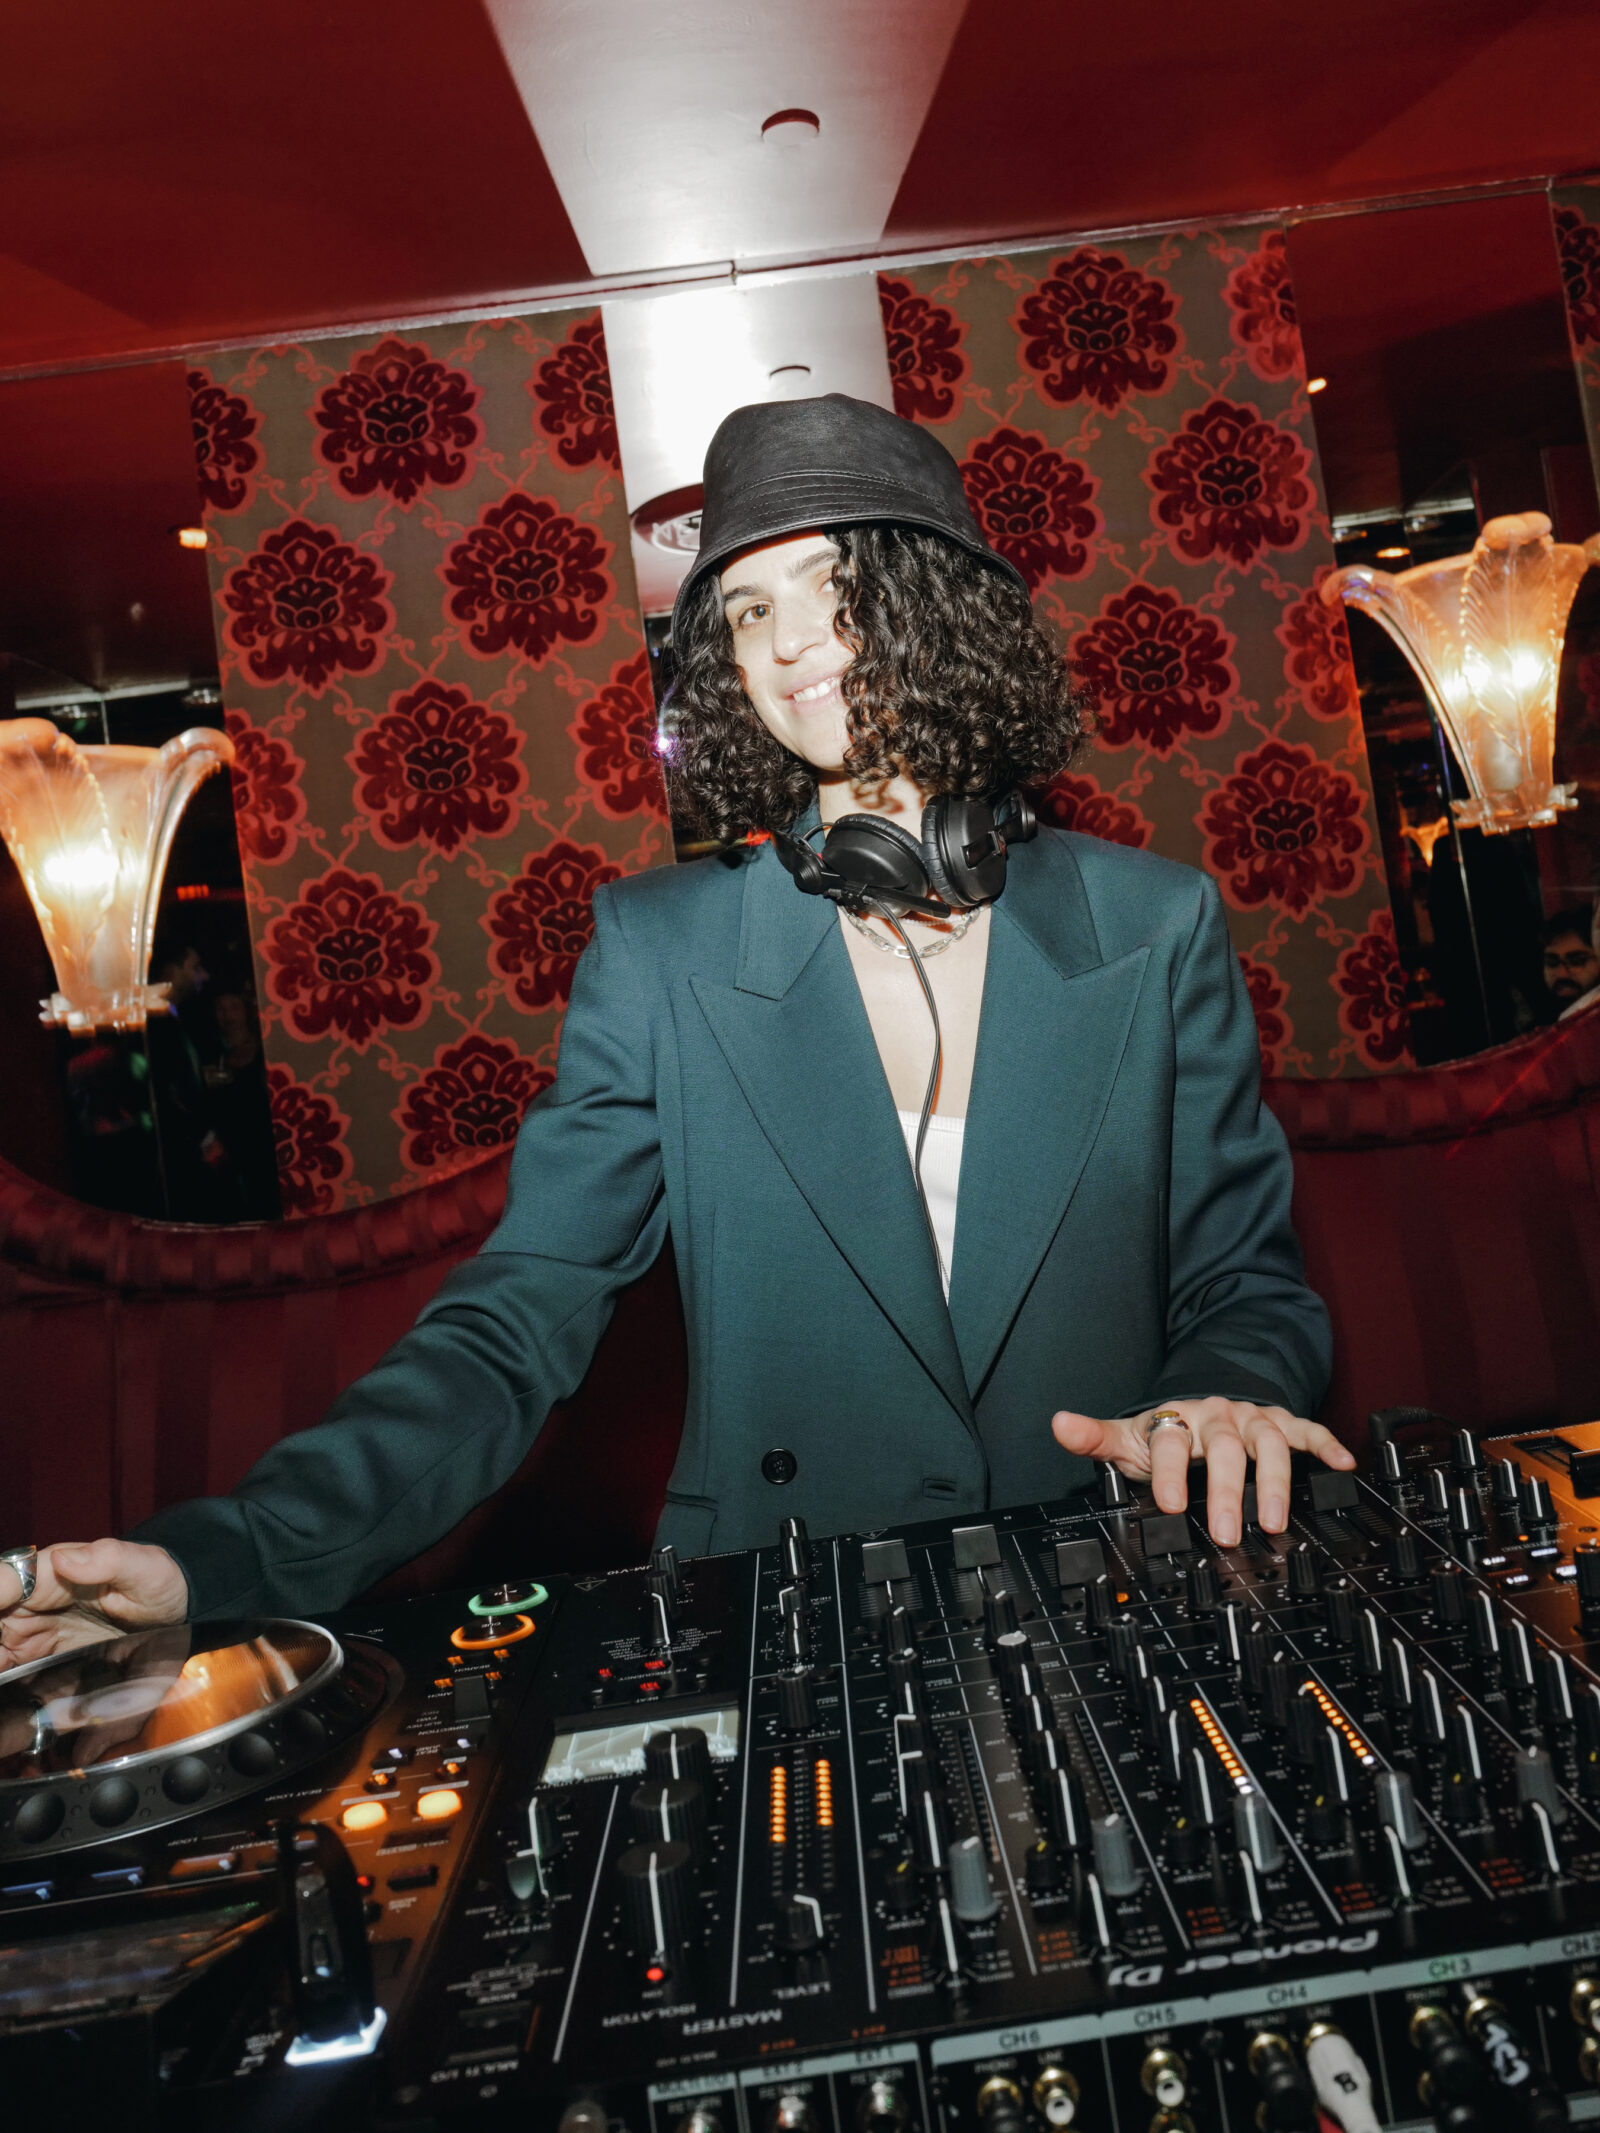 DJ Carlita mixes vibrant beats at The Doubles Club, adding an electrifying soundtrack to the NET-A-PORTER and Gabriela Hearst exclusive collection launch.